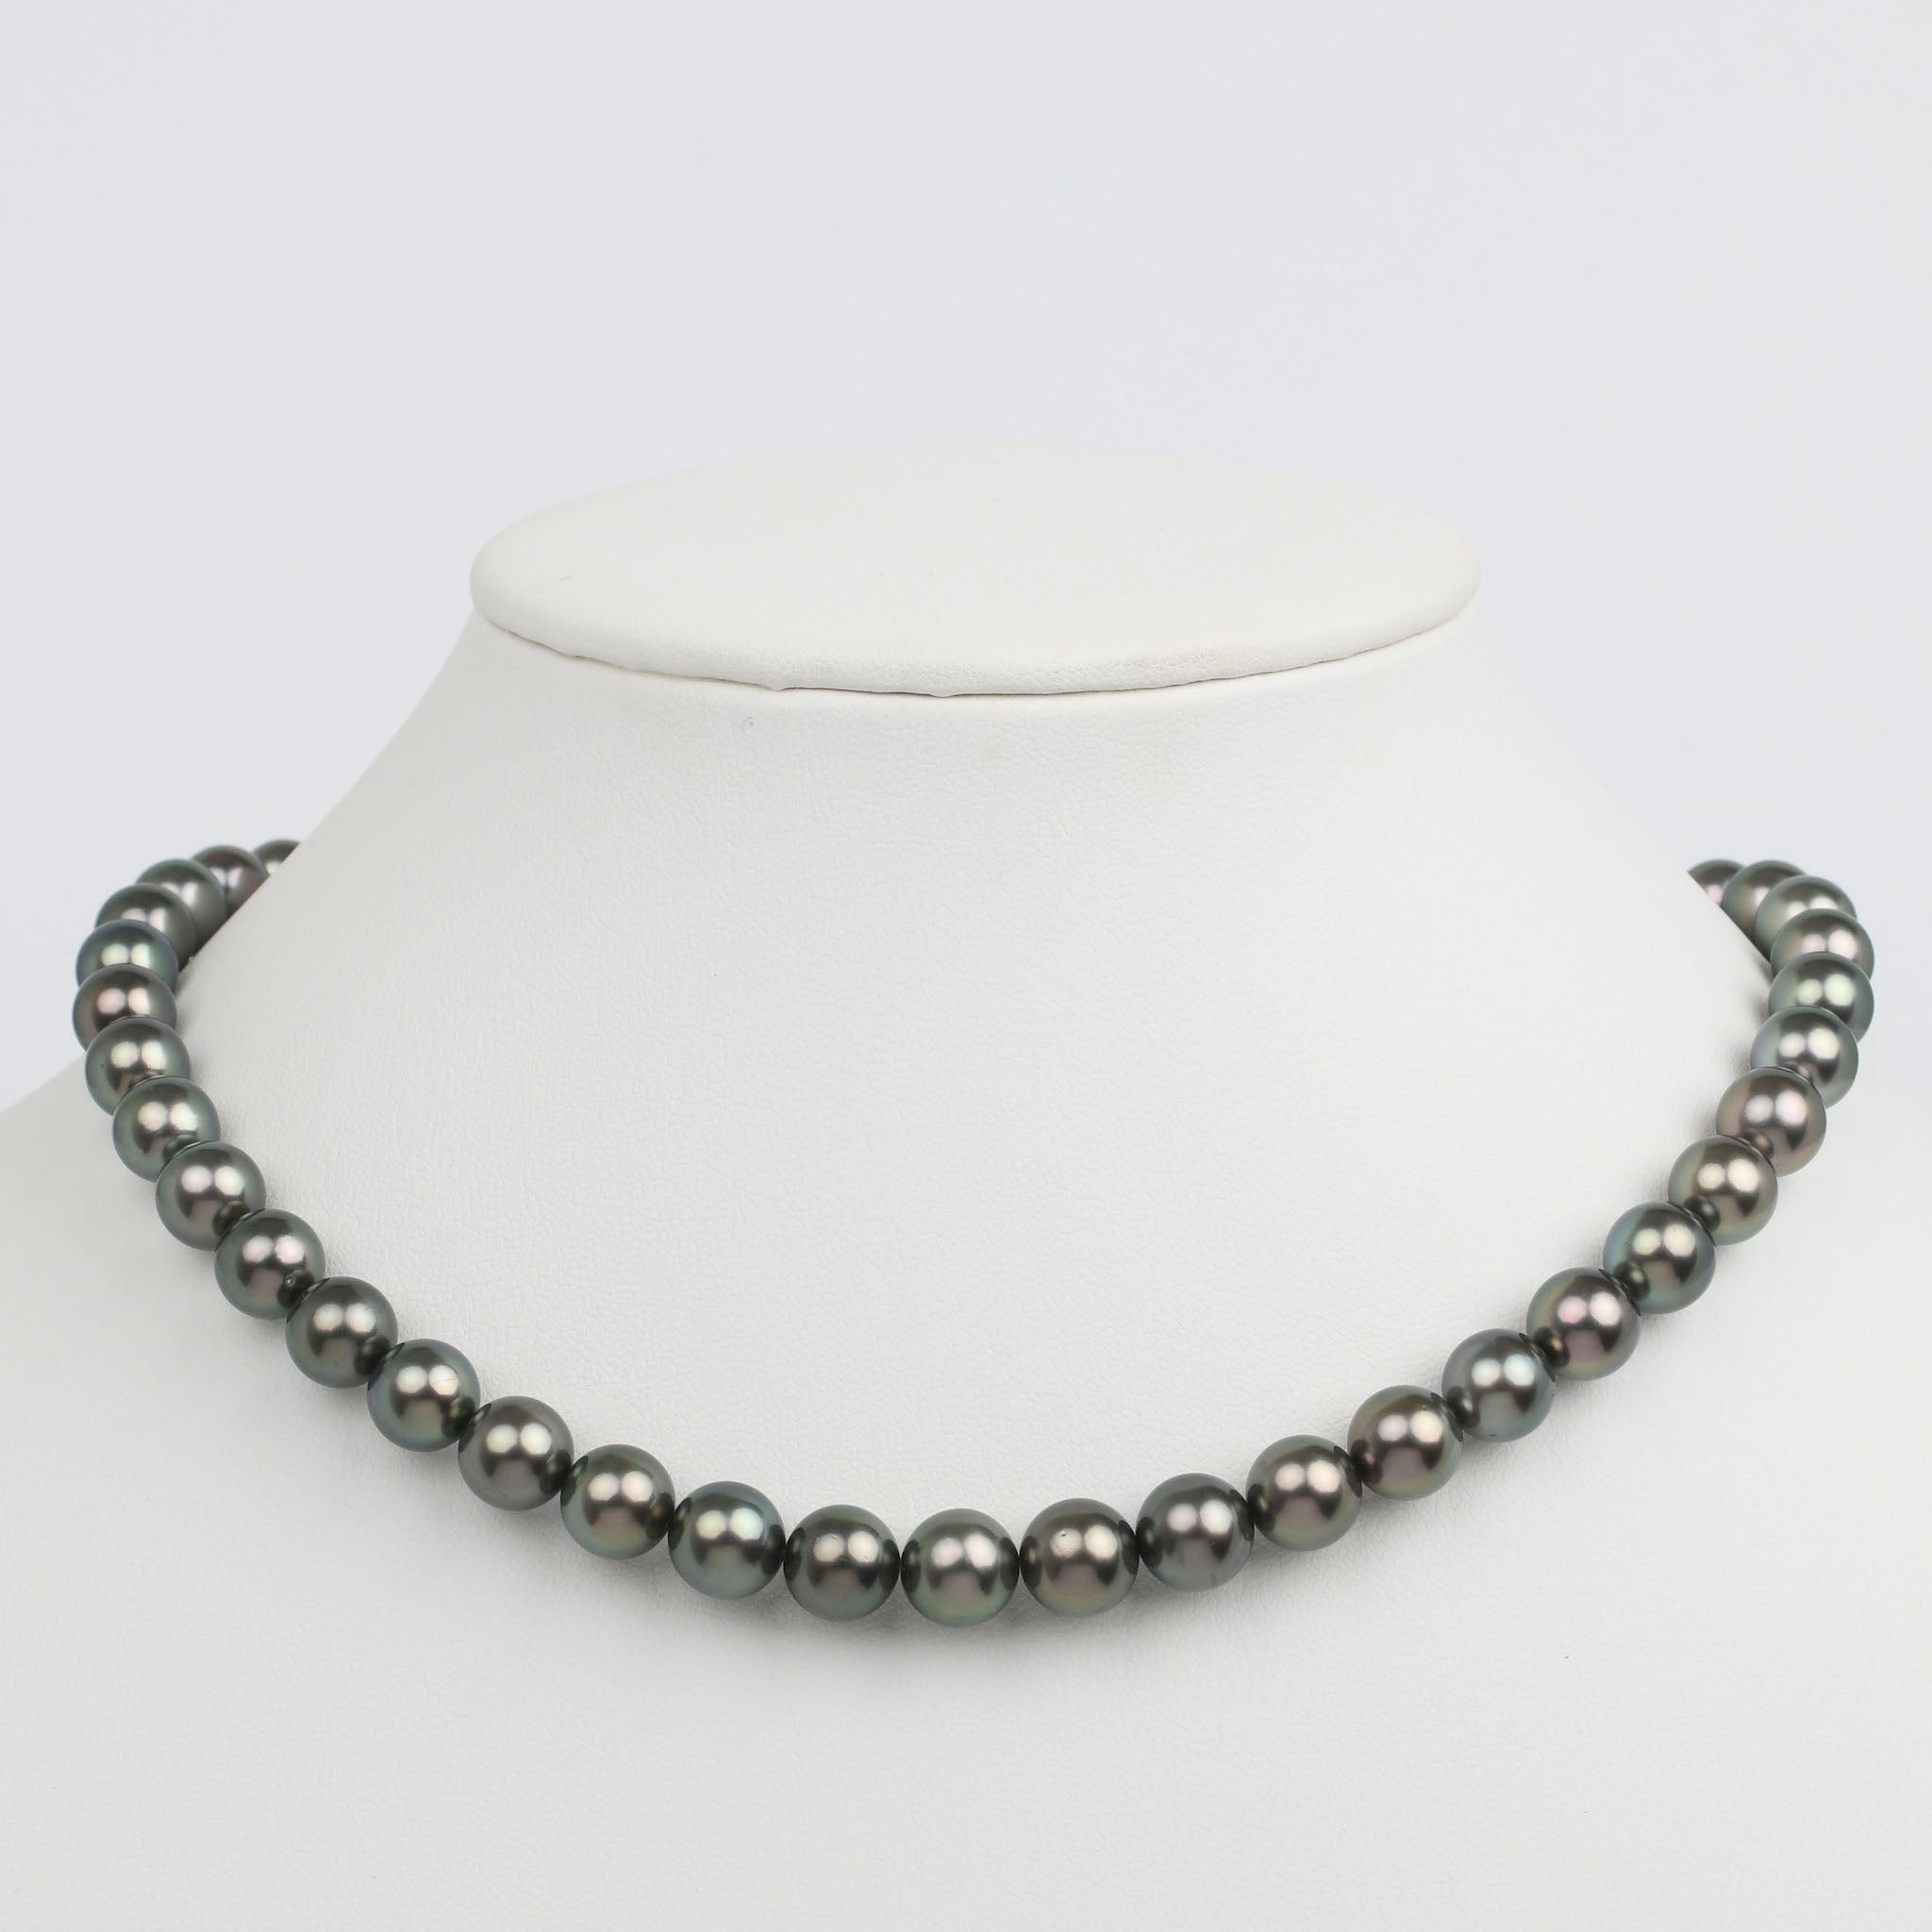 18-inch 9.0-9.9 mm AA+/AAA Round Tahitian Pearl Necklace bust view